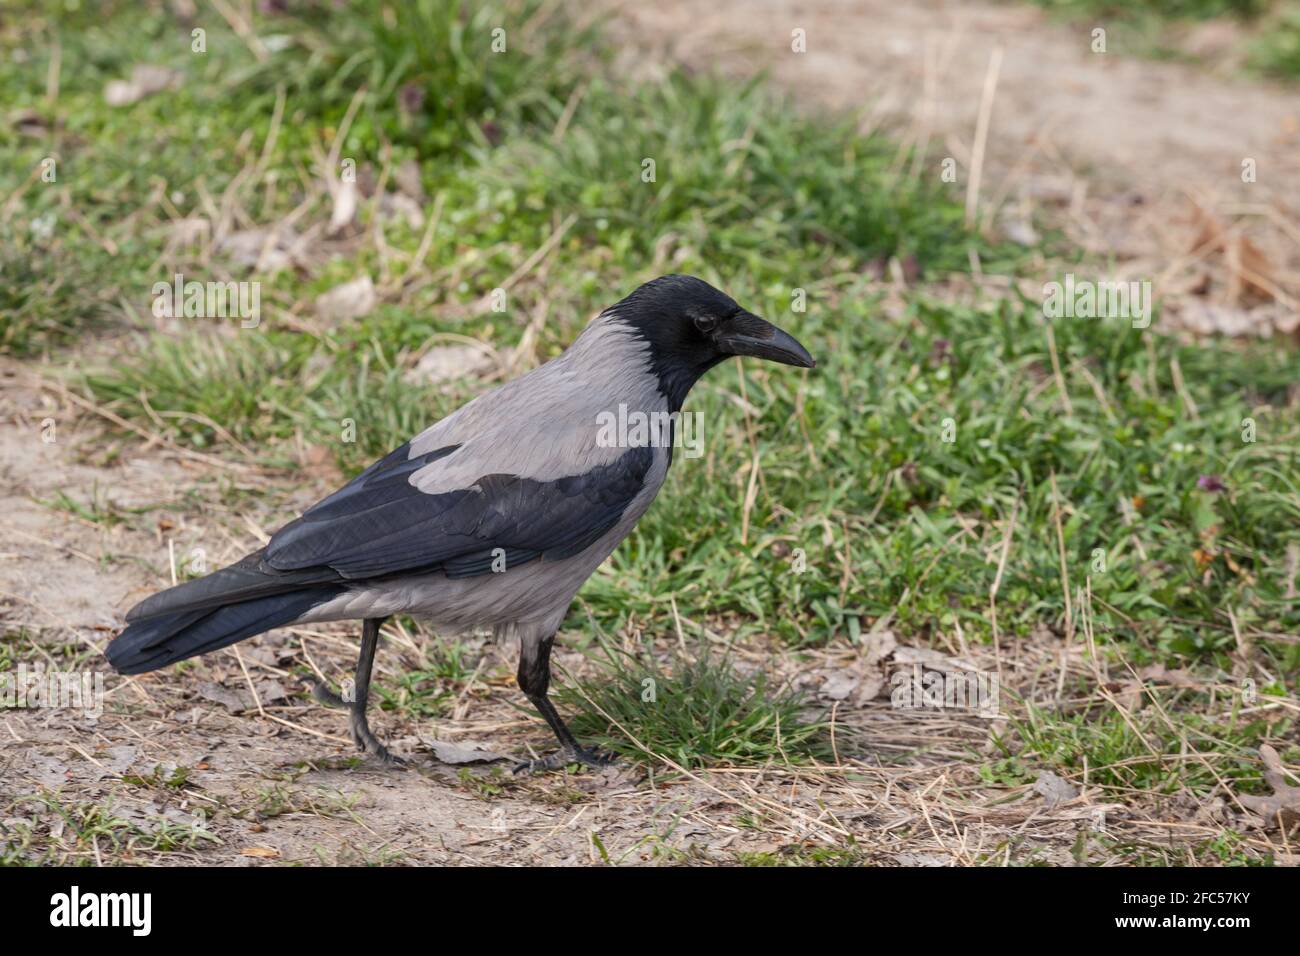 Focus on a hooded crow, a black and grey crow bird from the corvidae family, also called Corvus Cornix, standing on grass in Belgrade, Serbia.  Pictur Stock Photo